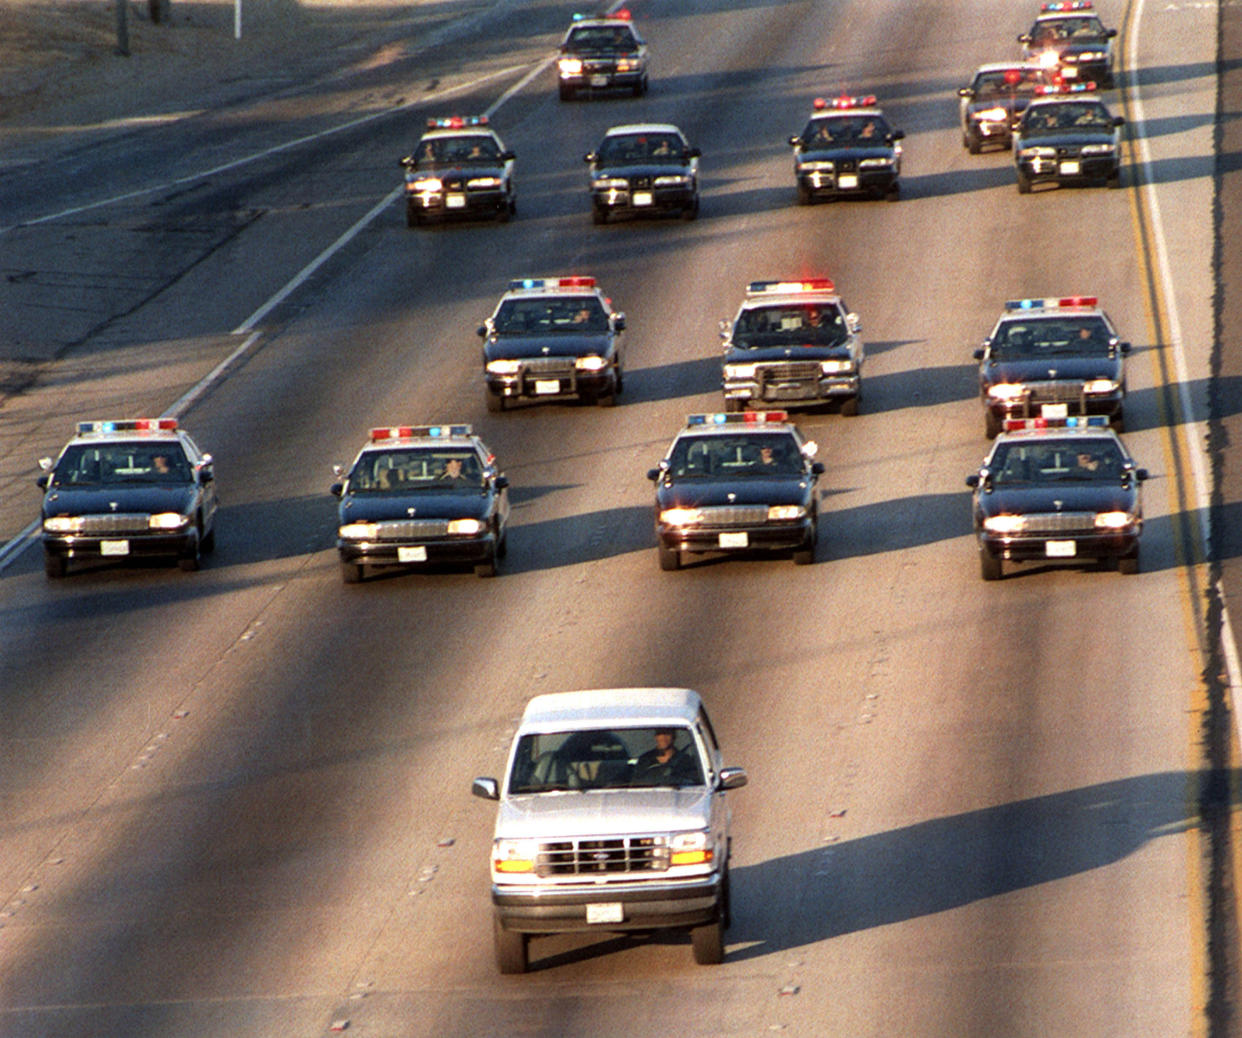 Highway Patrol chases O.J. Simpson in a white Ford Bronco on the freeway on June 17, 1994.